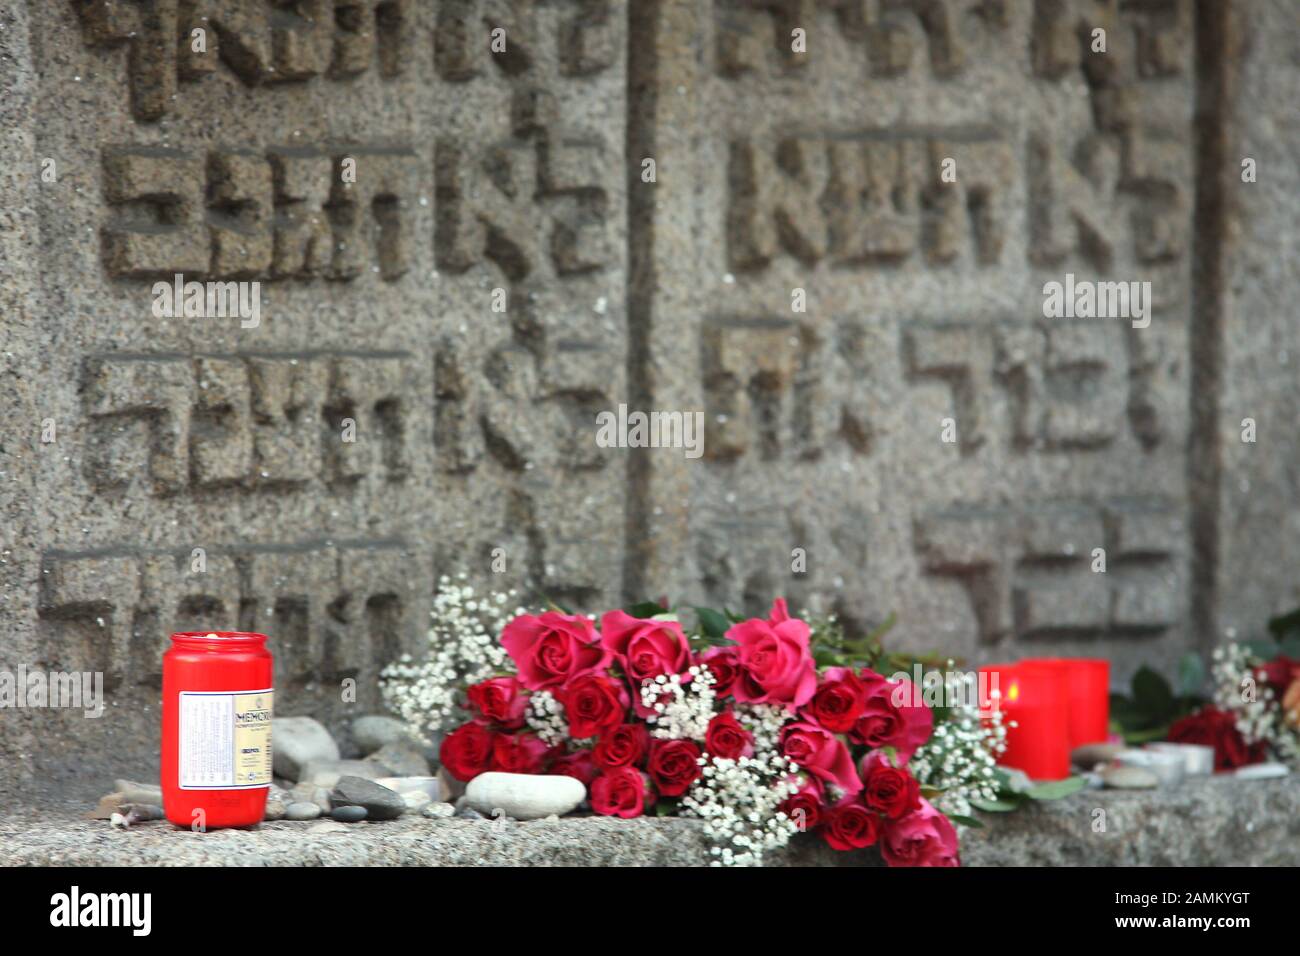 Reading of the names of the Munich Holocaust victims at the former main synagogue in Herzog-Max-Strasse on the occasion of the 70th anniversary of the Night of Broken Glass on 9 November 1938. In the picture flowers and candles in front of the memorial stone. [automated translation] Stock Photo